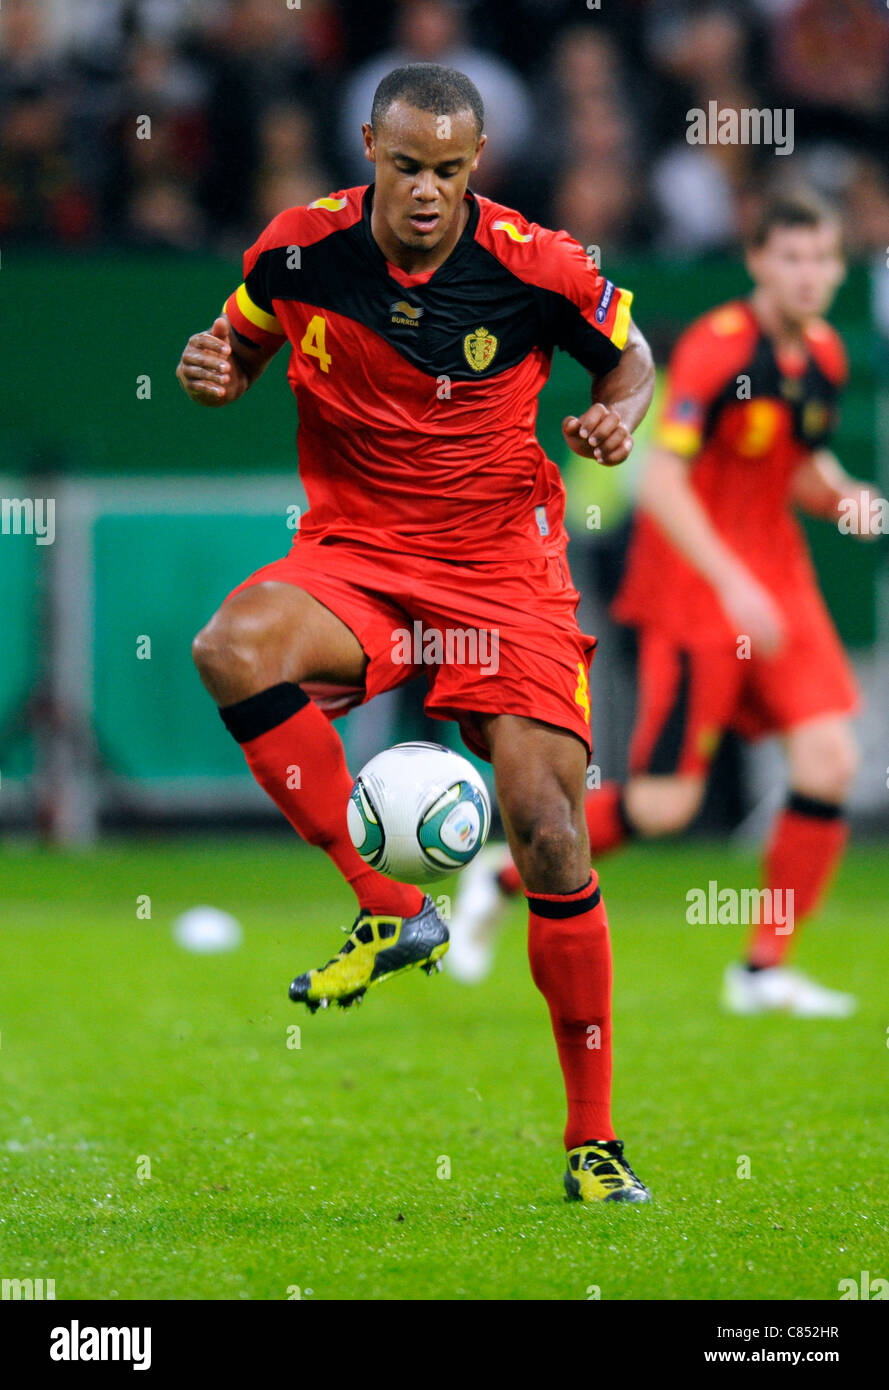 Qualification match for the European Football Championship in Poland and Ukraine 2012; Germany vs Belgium 3:1, at the Esprit Arena in Duesseldorf, Germany: Vincent Kompany (Belgium, Manchester City). Stock Photo